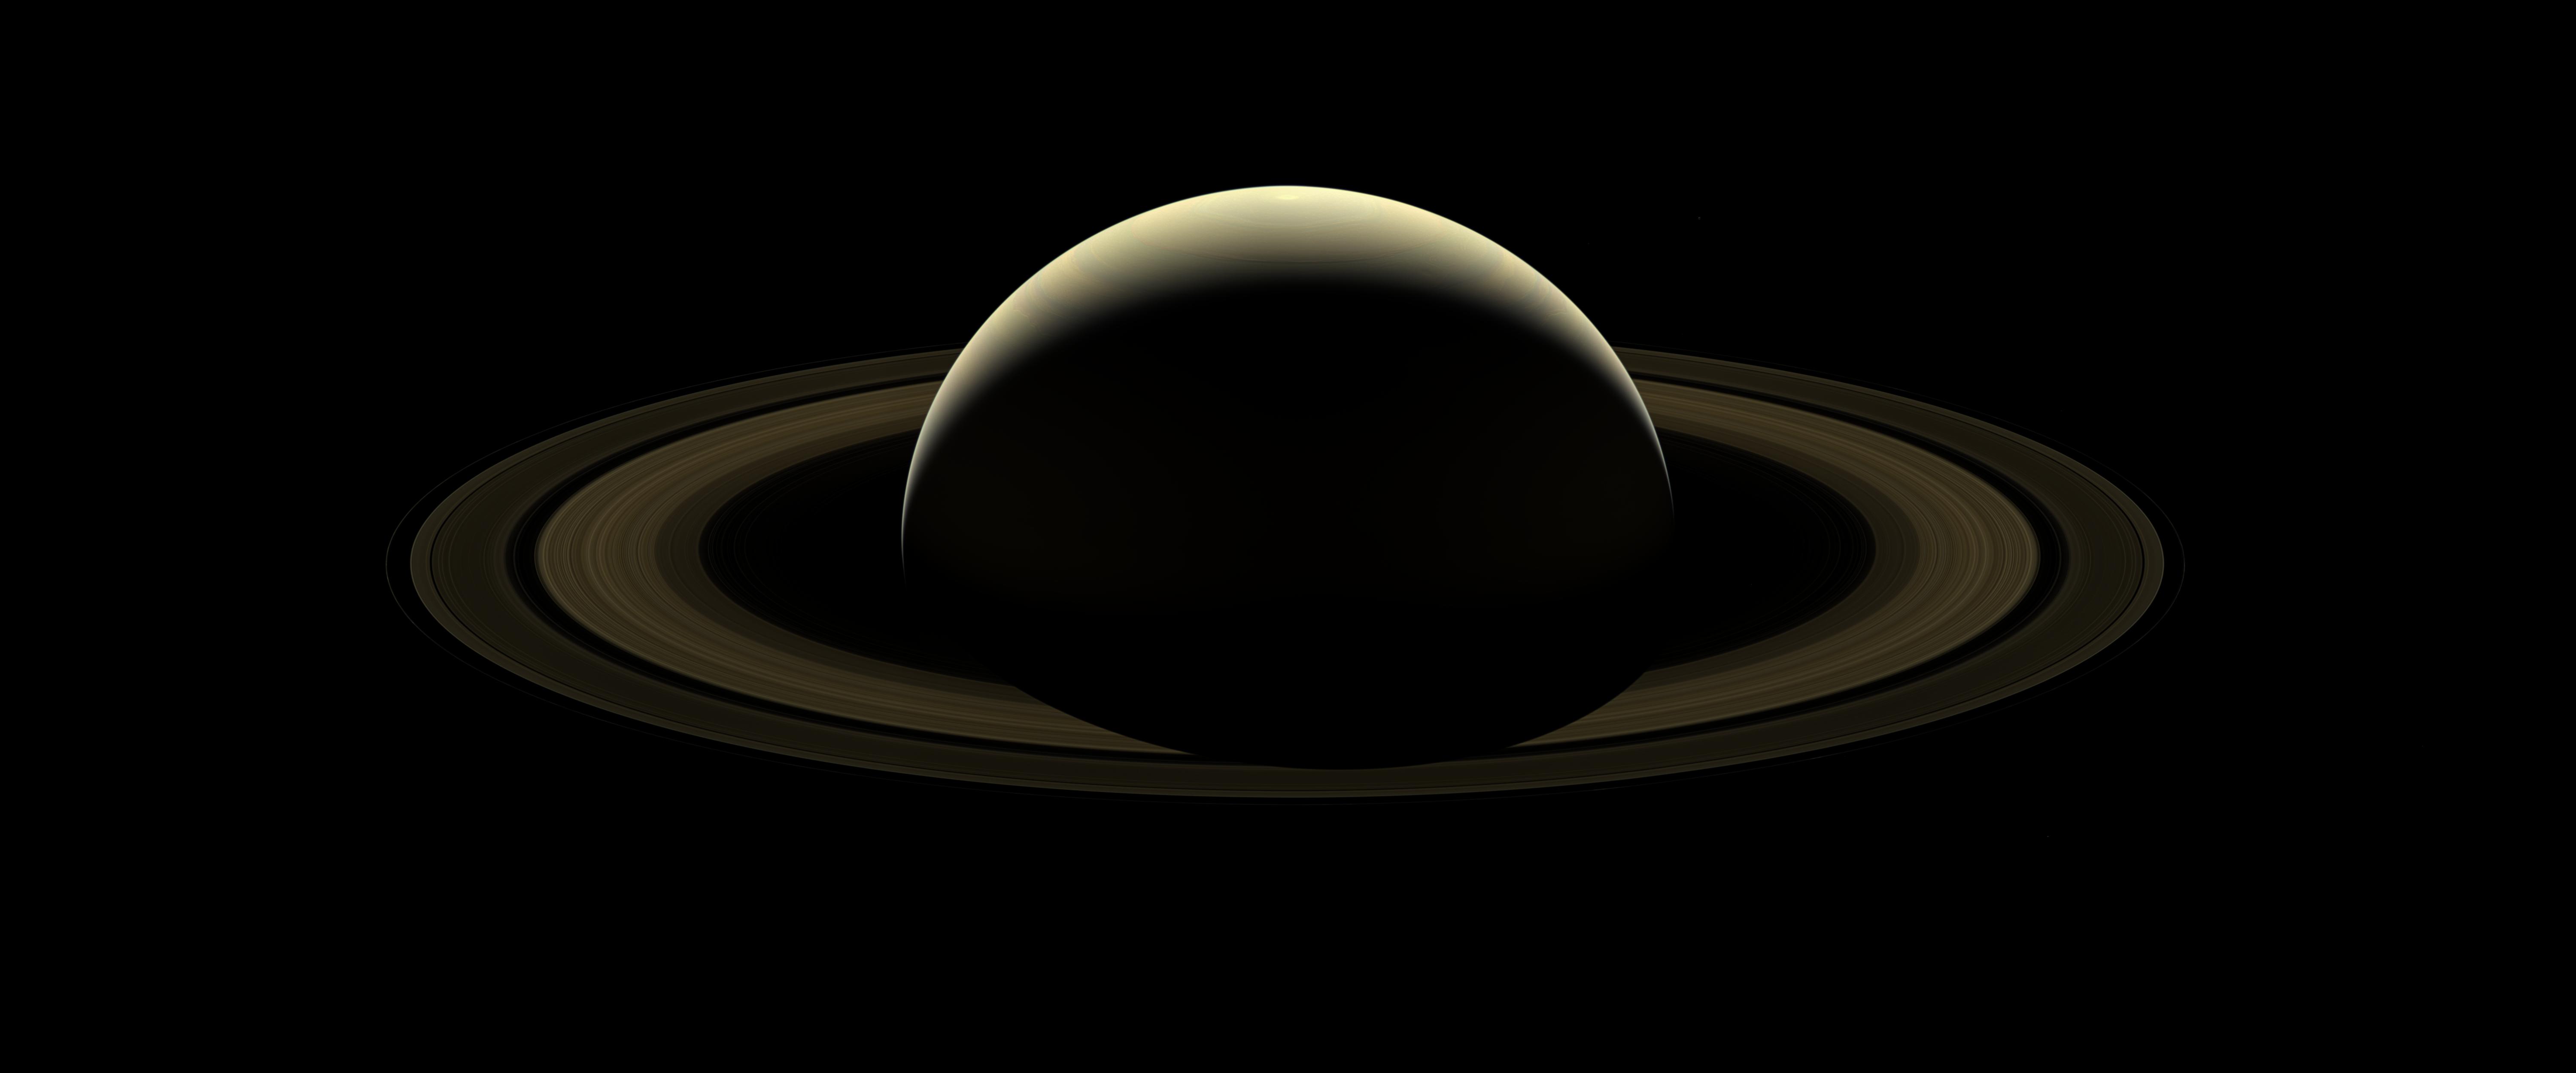 After more than 13 years at Saturn, and with its fate sealed, NASA's Cassini spacecraft bid farewell to the Saturnian system by firing the shutters of its wide-angle camera and capturing this last, full mosaic of Saturn and its rings two days before the spacecraft's dramatic plunge into the planet's atmosphere.